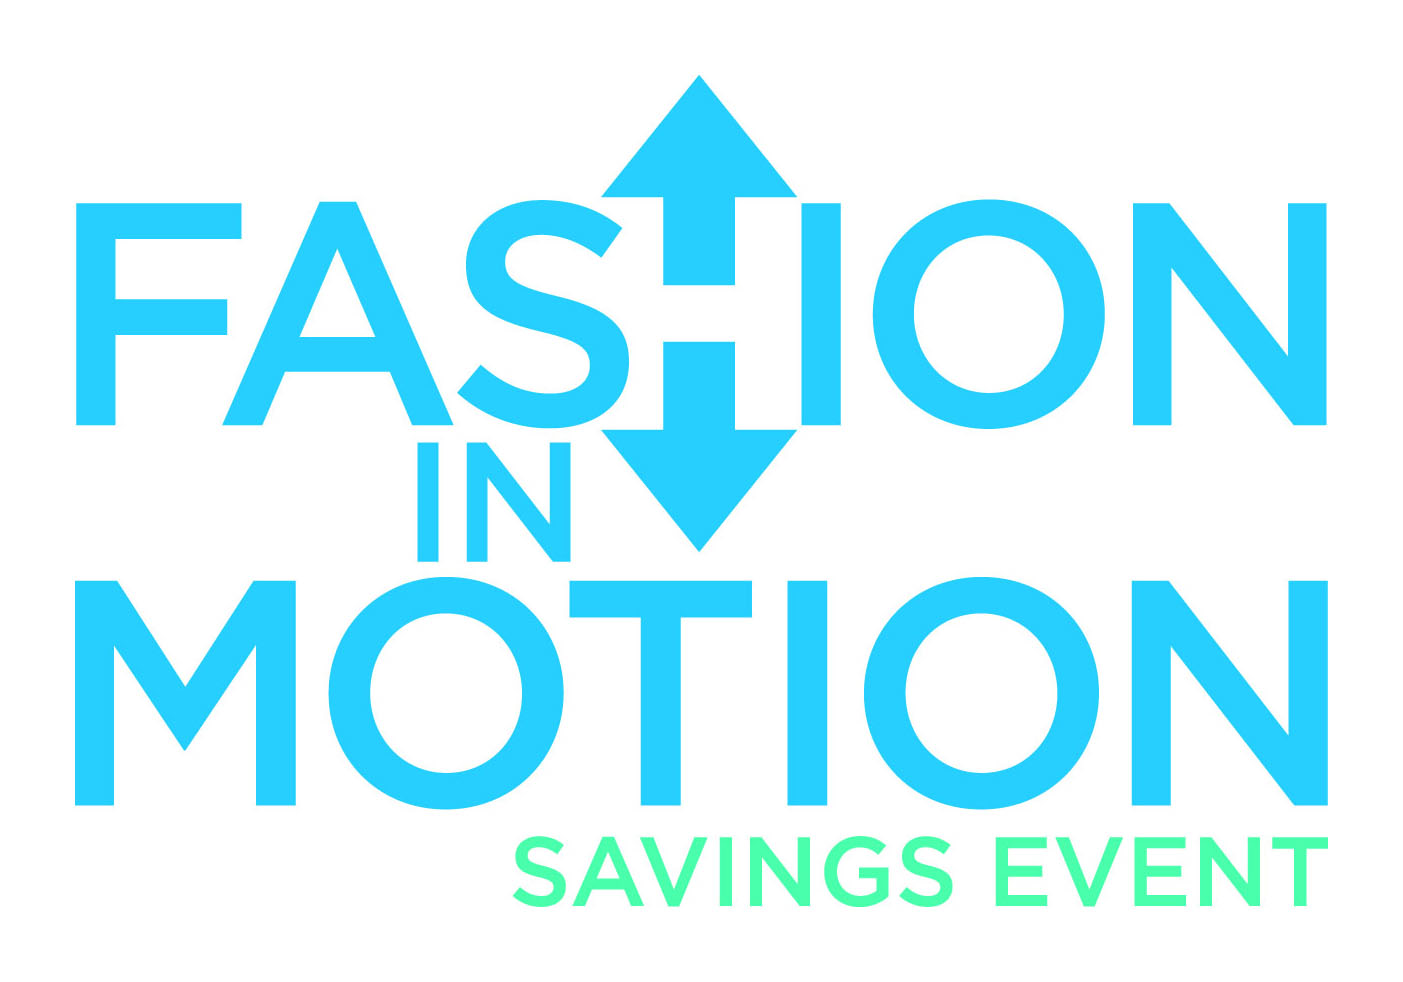 Fashion in Motion savings event on motorized window blinds